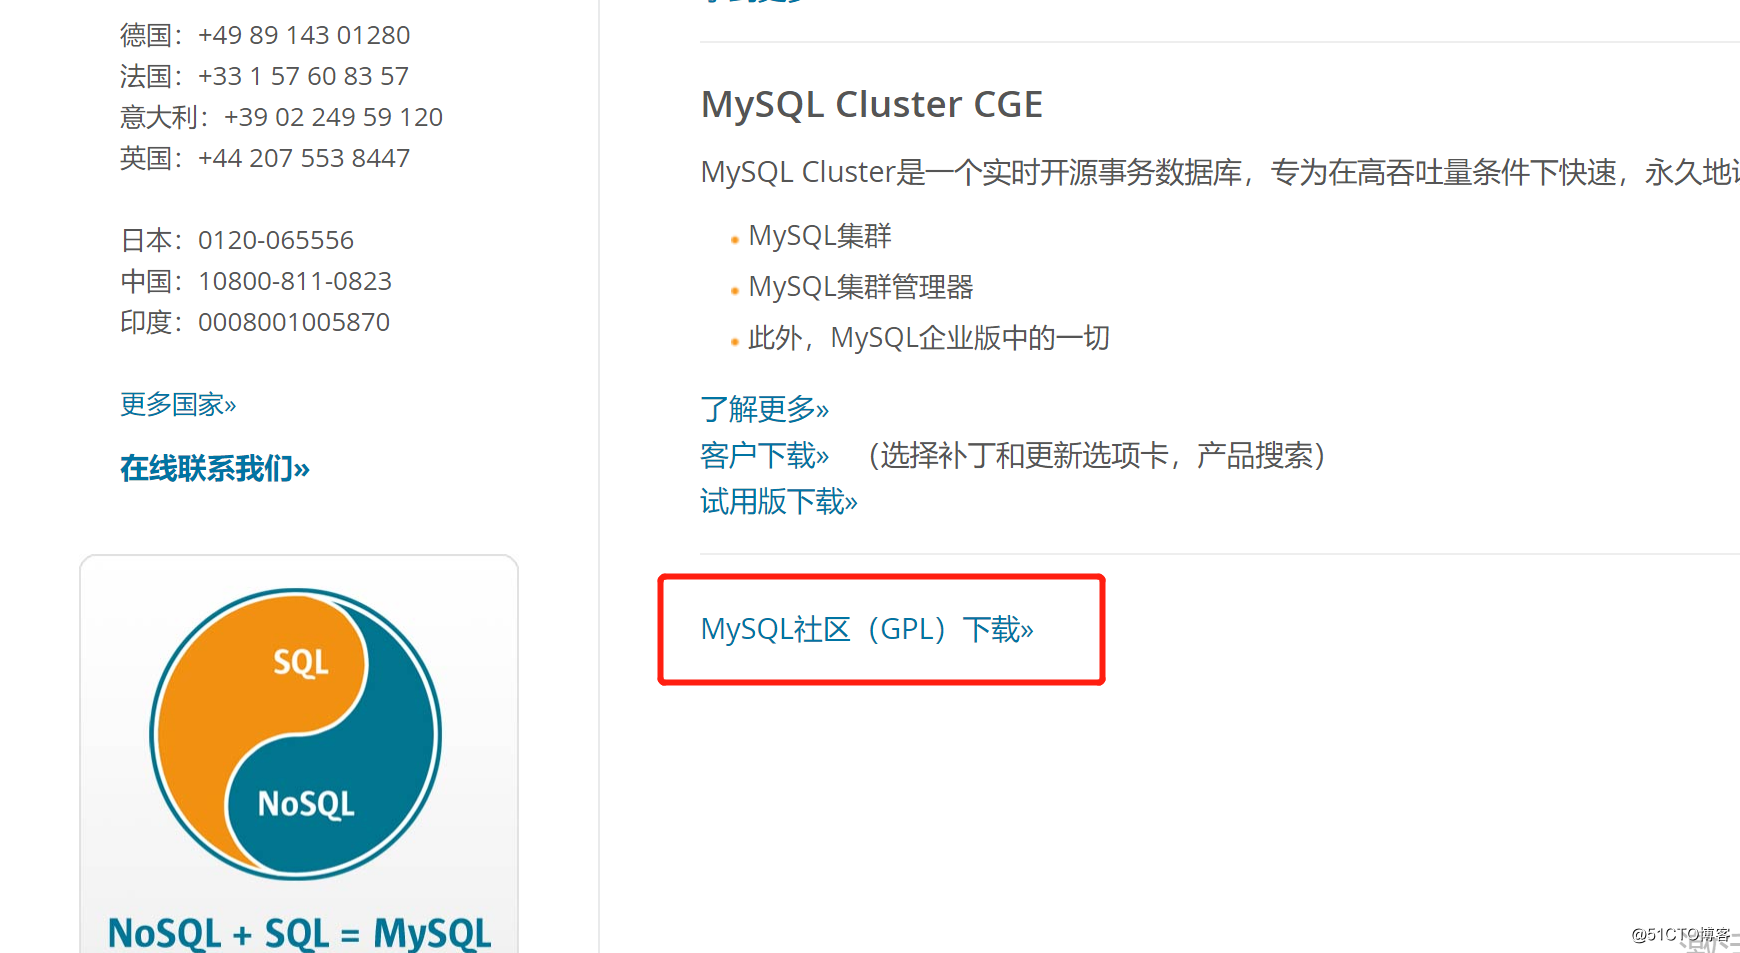 MySQL official website to download and install the .rpm package